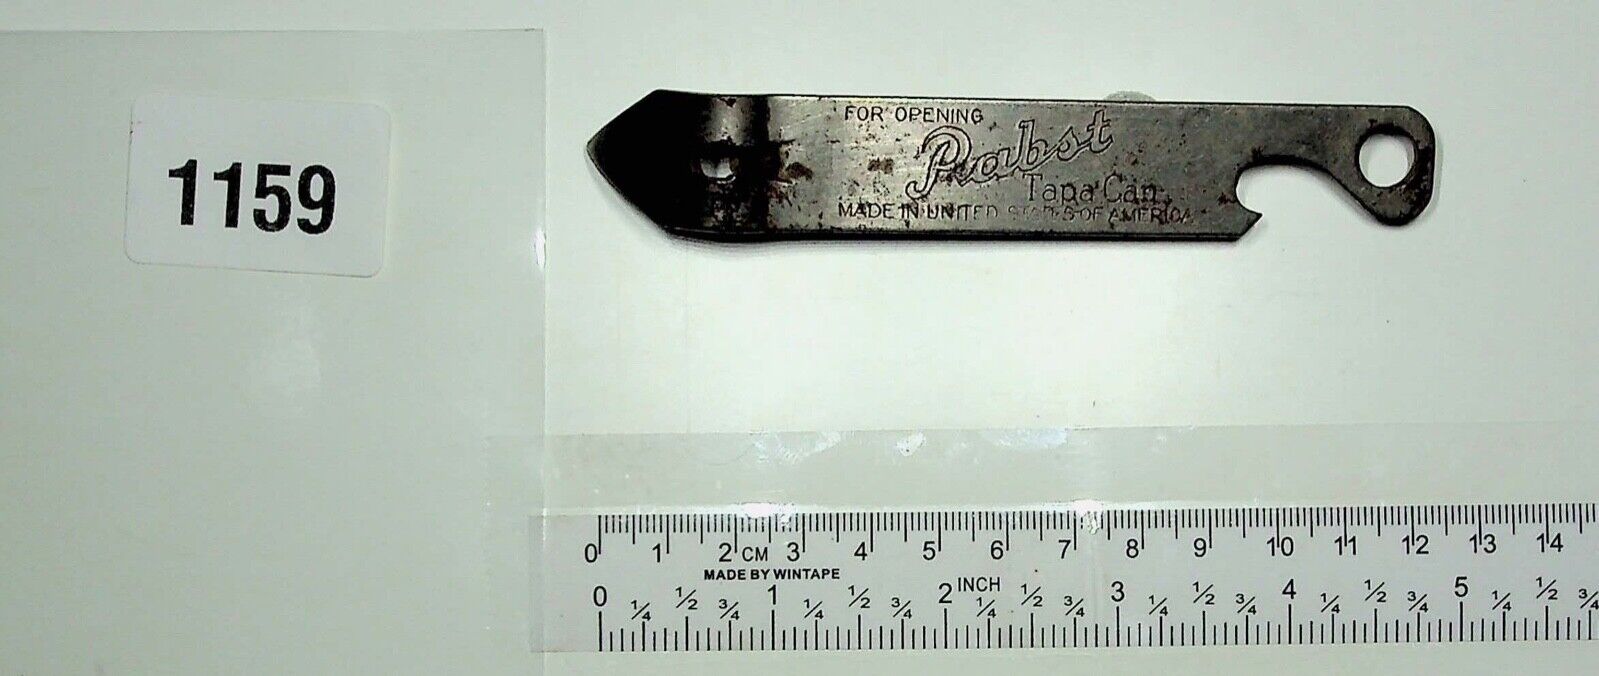 PABST TAPA CAN BOTTLE OPENER 4 1/2 INCHES LONG VINTAGE 